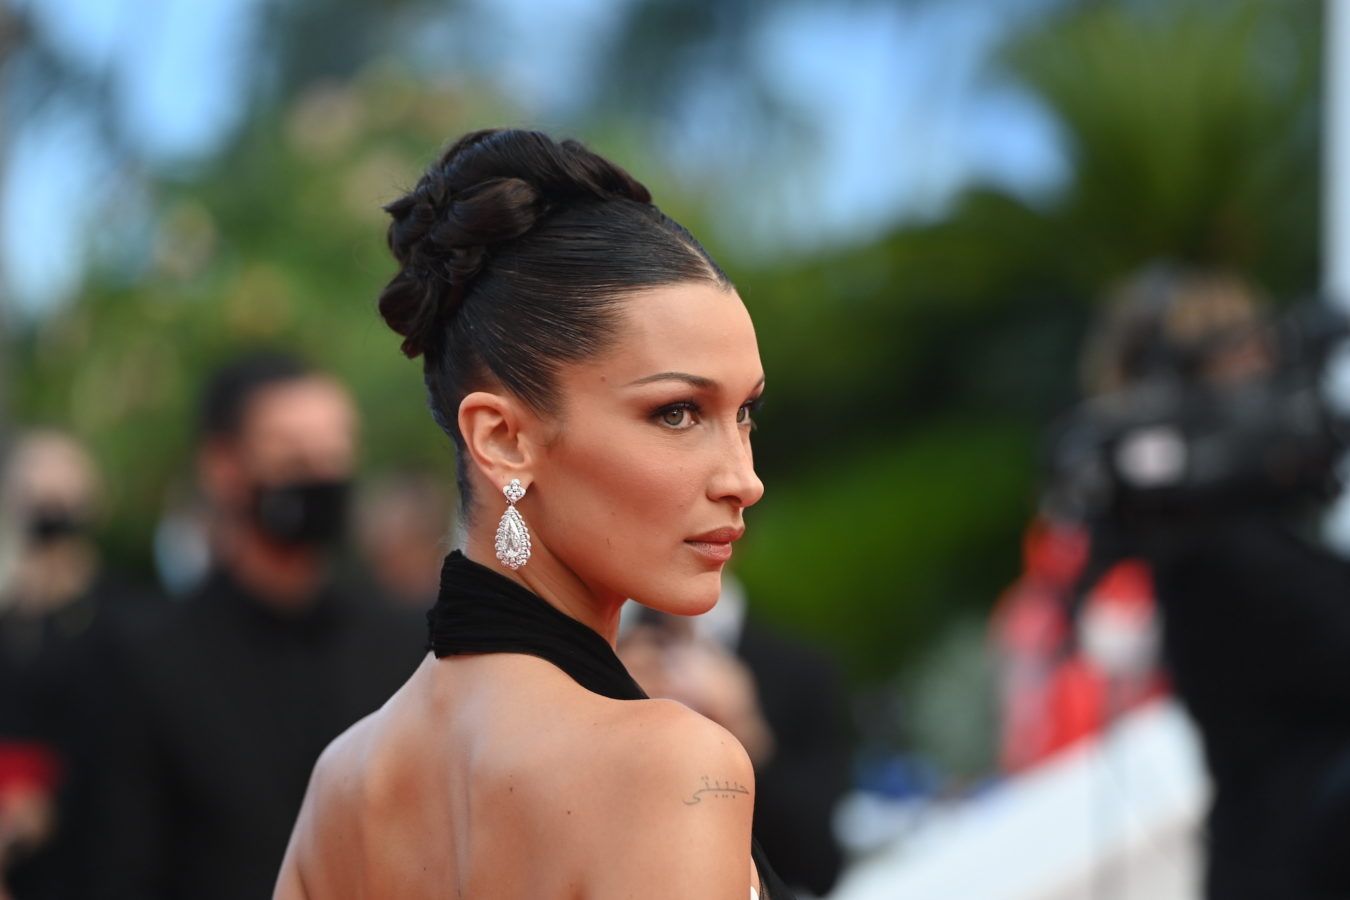 Cannes Film Festival 2021: Best celebrity moments dazzling in Chopard